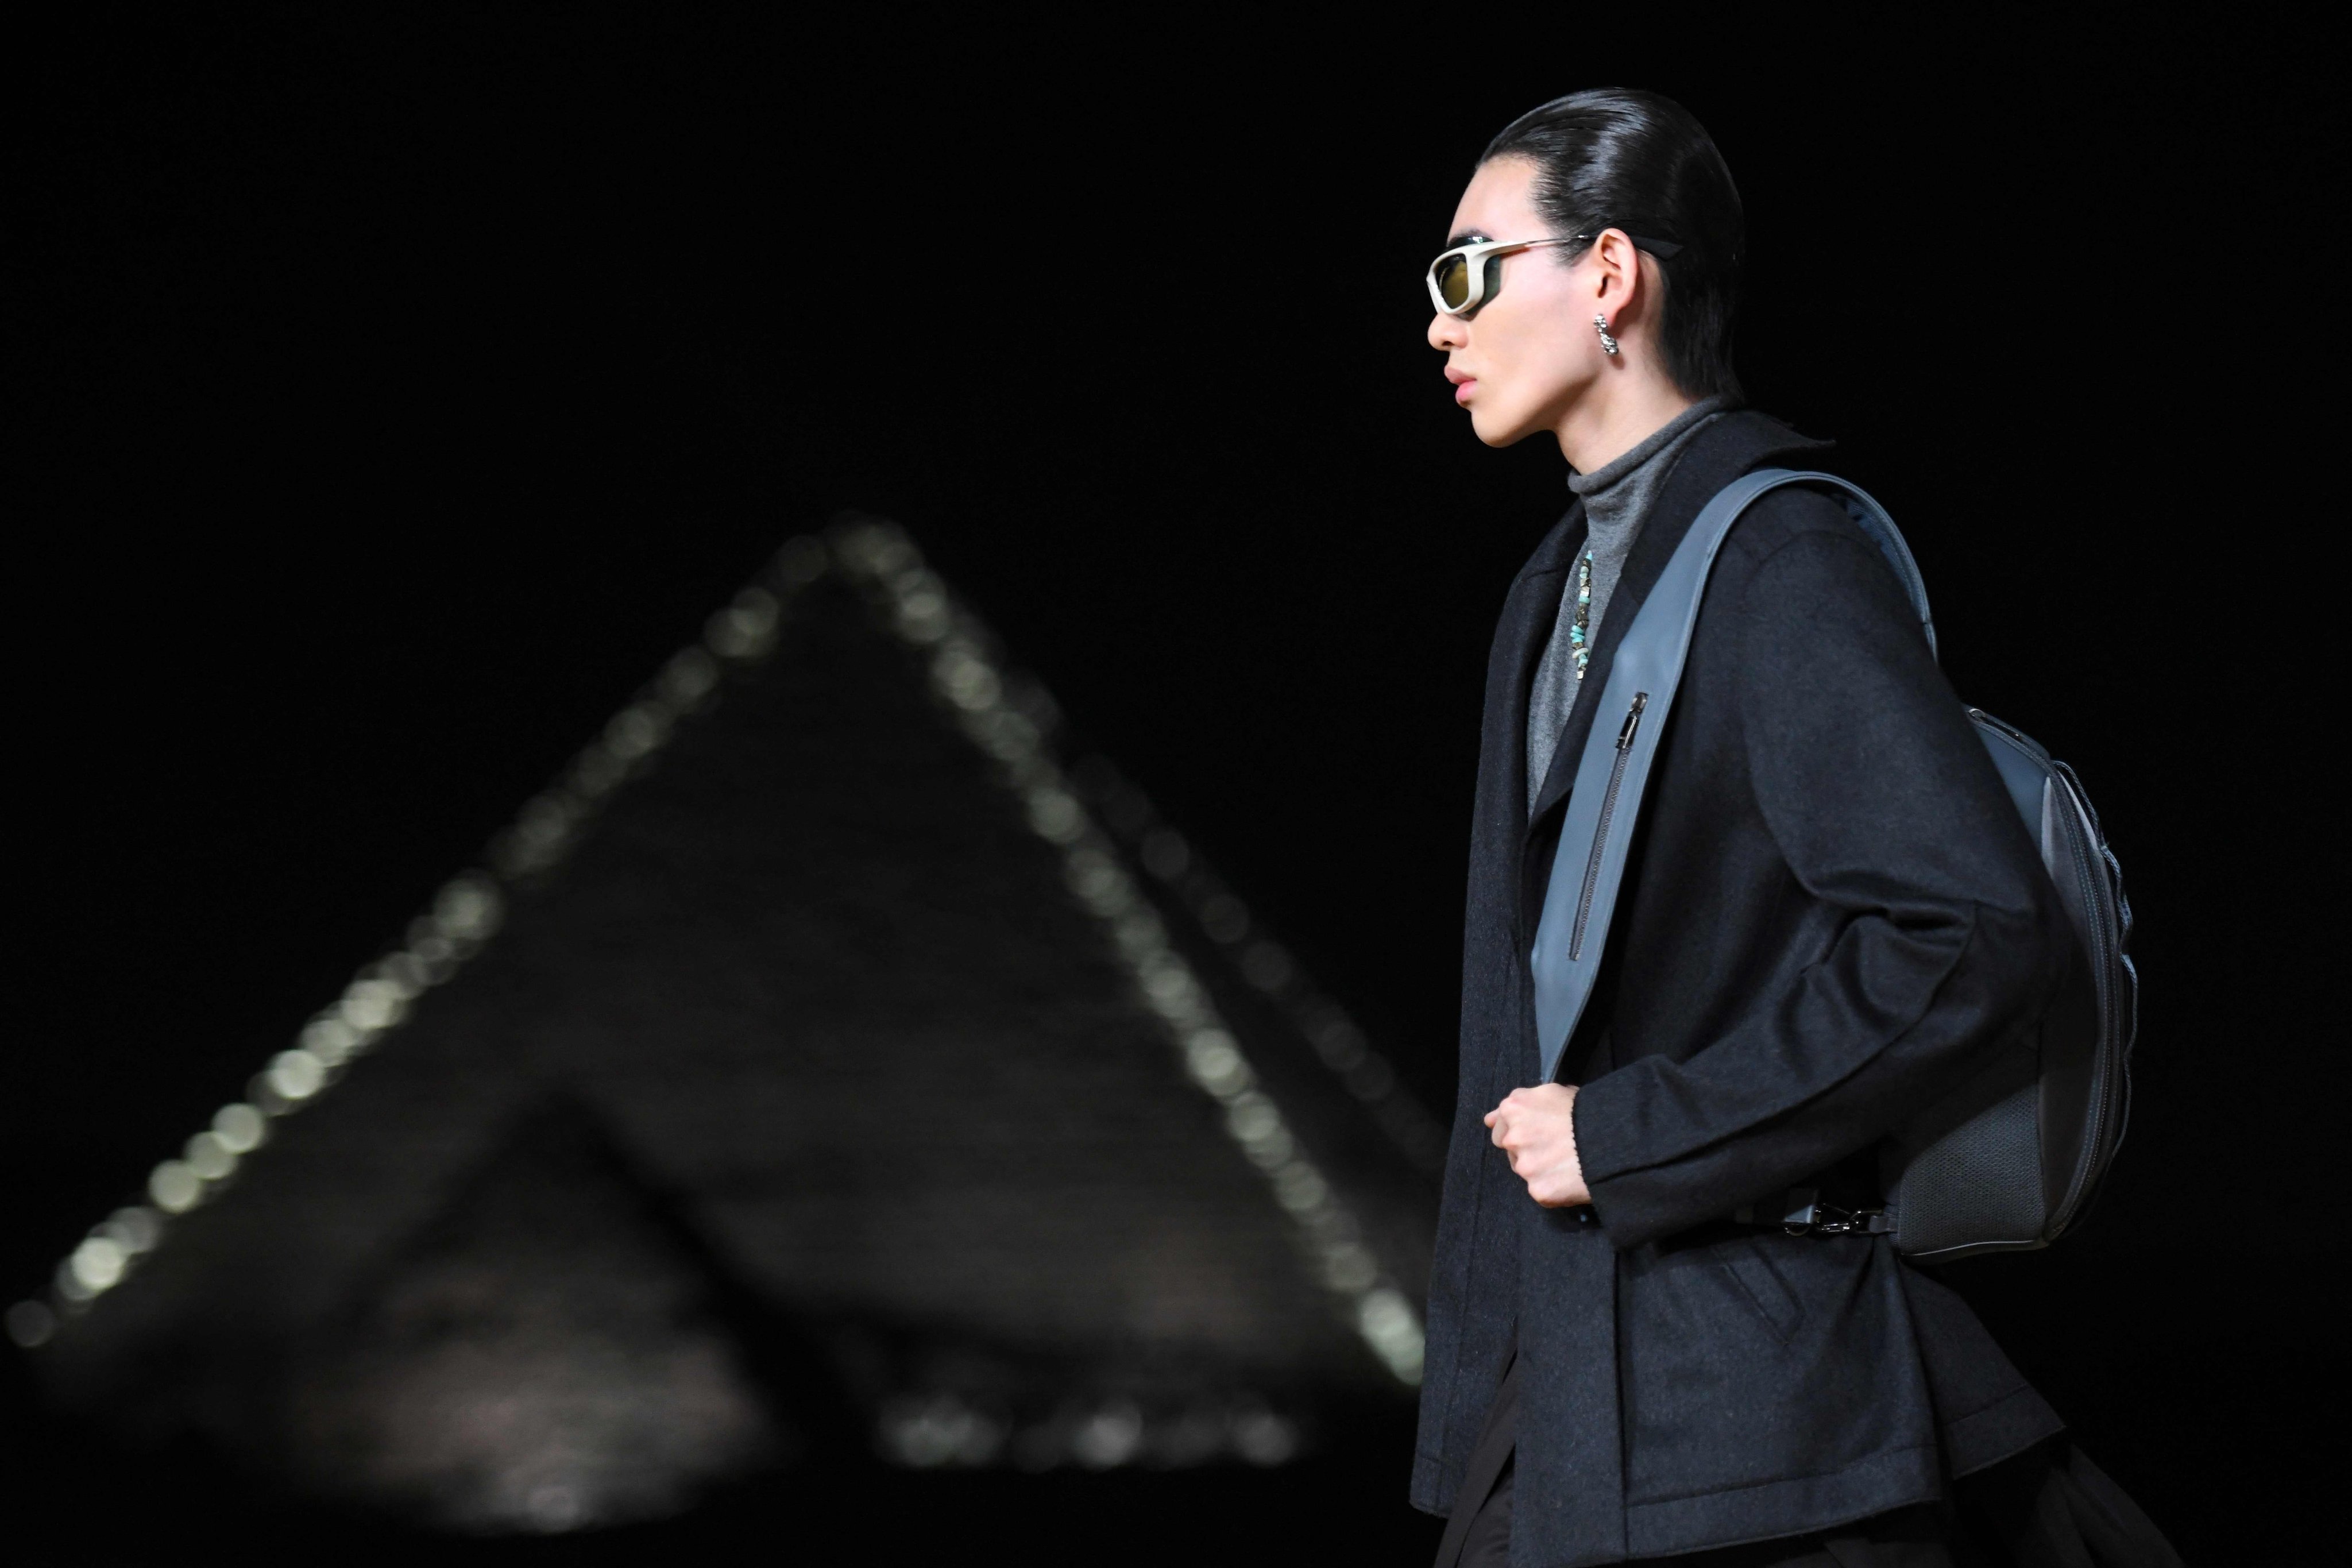 Christian Dior held its first fashion show at the Giza pyramids in Egypt on December 3. Photo: AFP